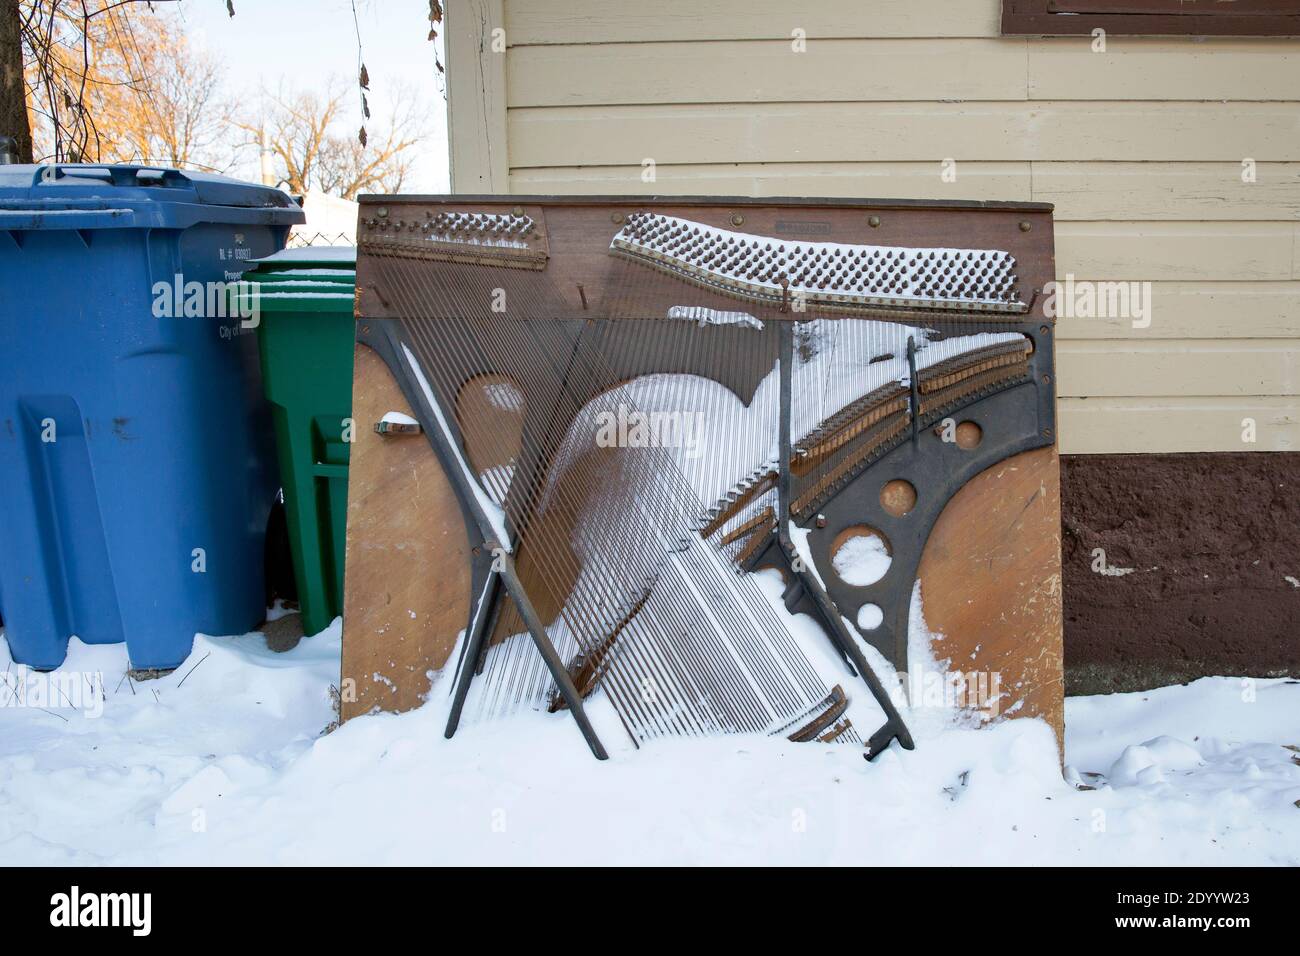 Snow covered old vintage upright piano soundboard in the alley awaiting garbage and solid waste removal Stock Photo